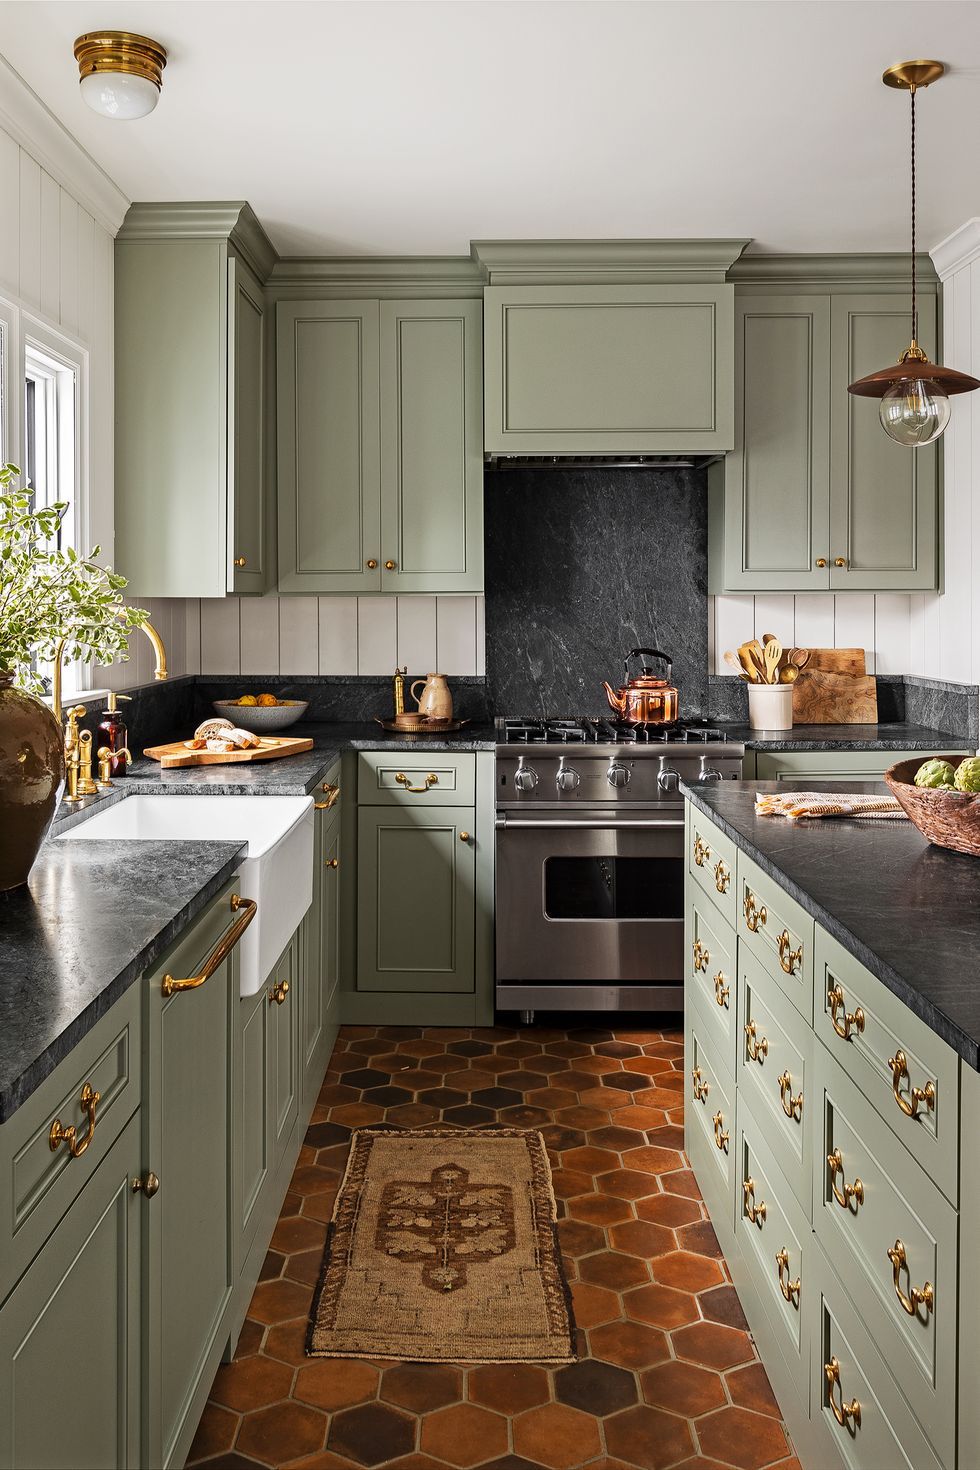 20 Best Green Kitchen Cabinet Ideas   Top Green Paint Colors for ...